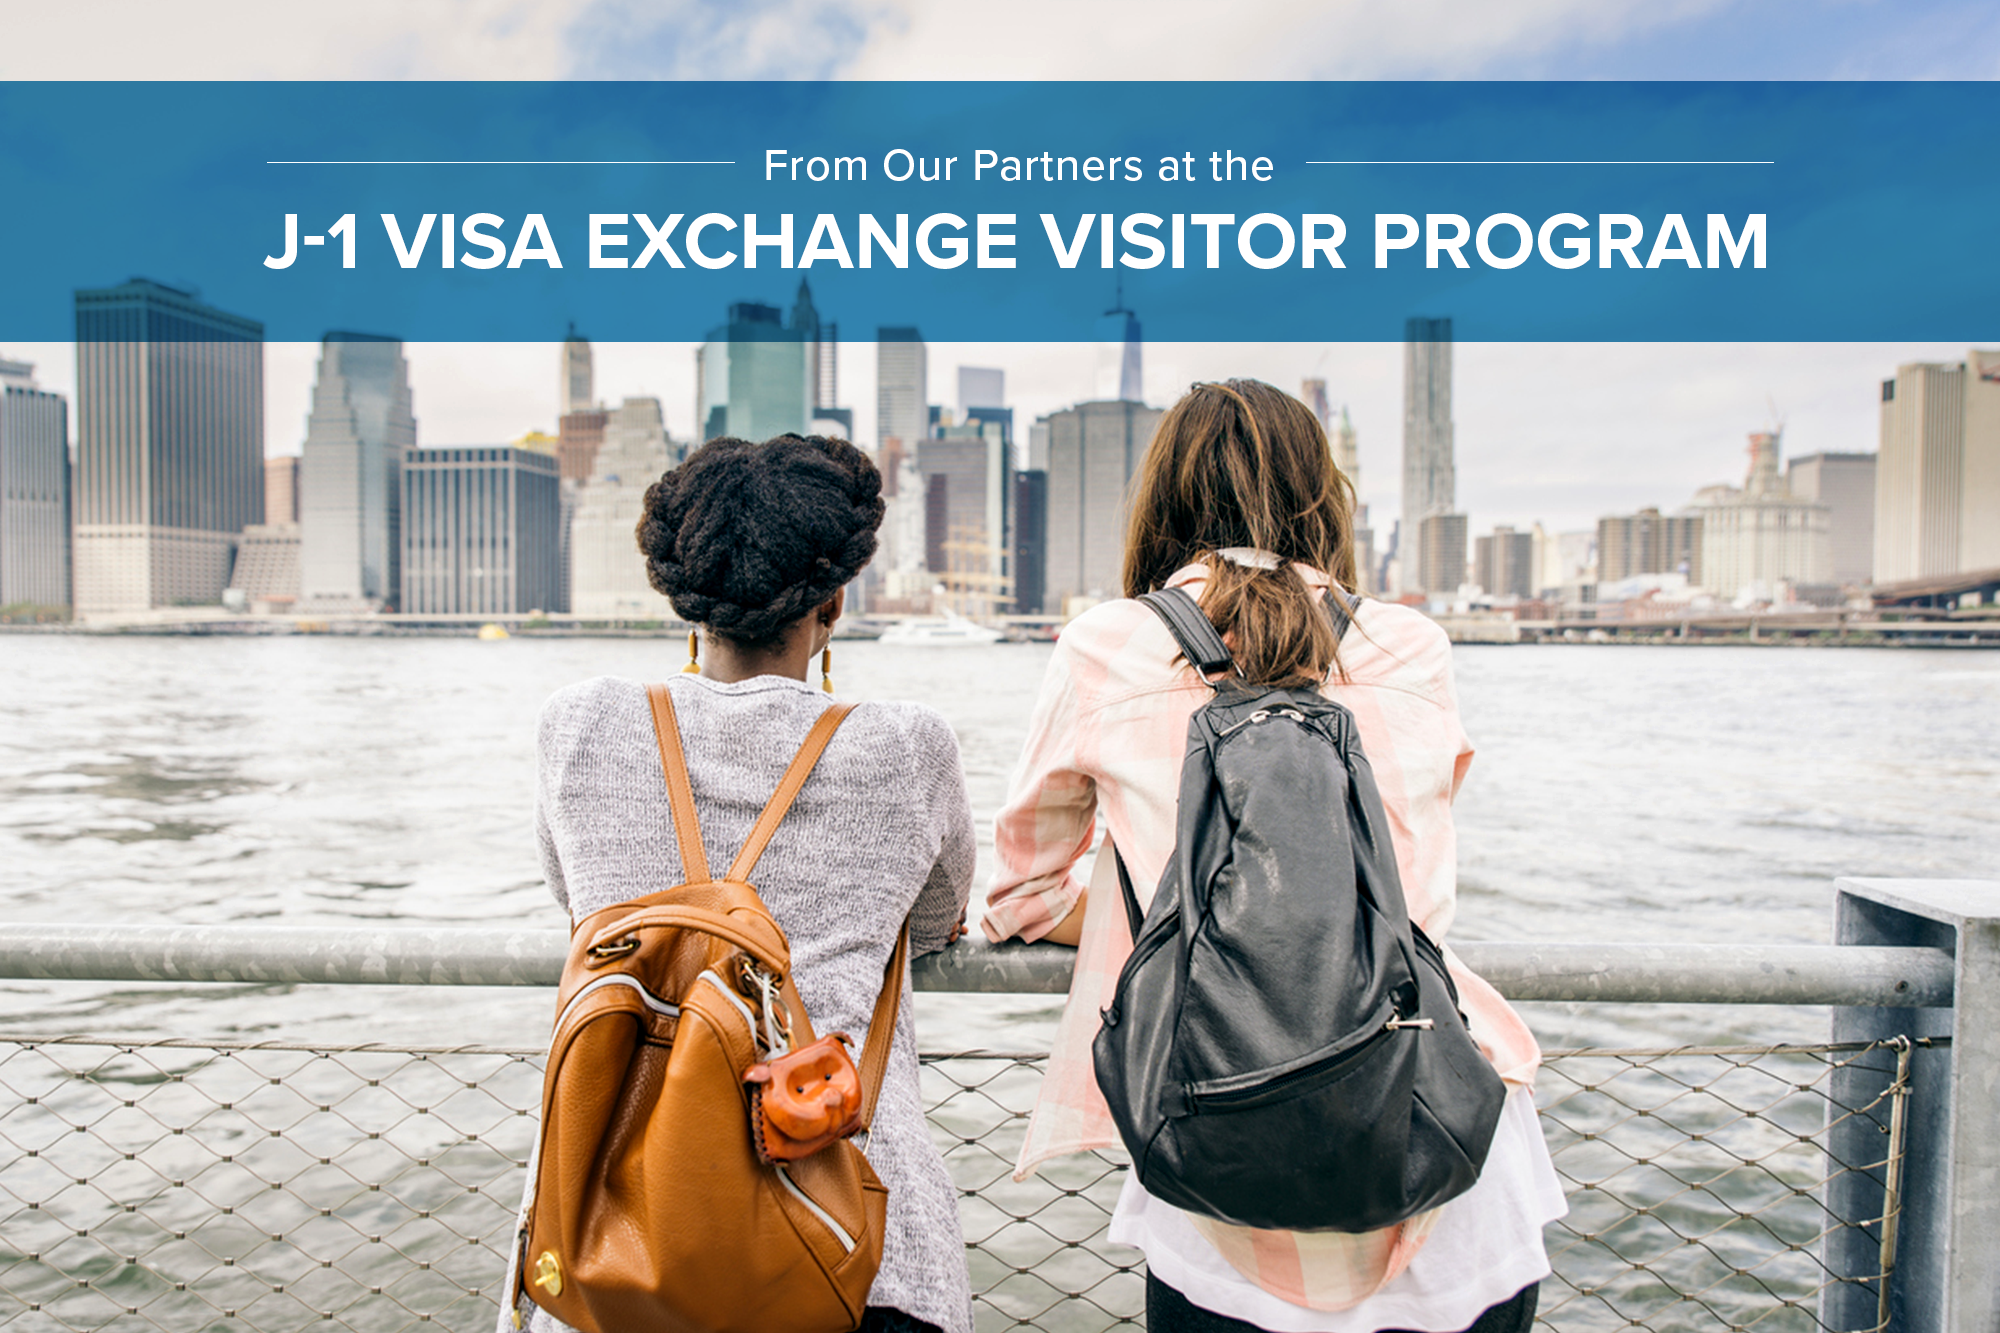 From our Partners at the J-1 Visa Exchange Visitor Program